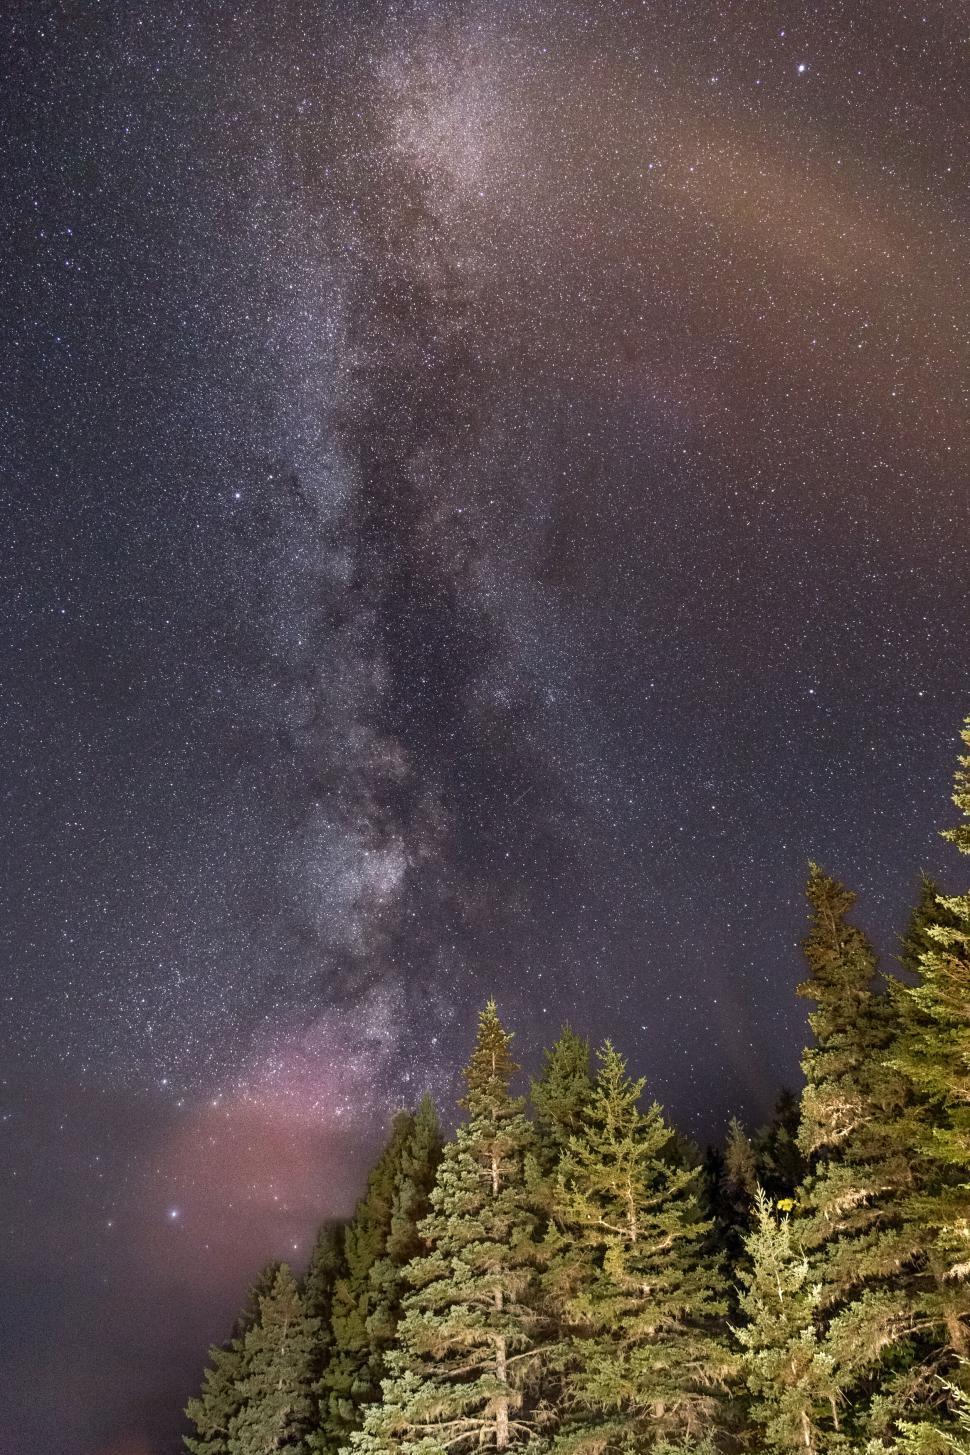 Free Image of Milky Way galaxy over a pine forest 